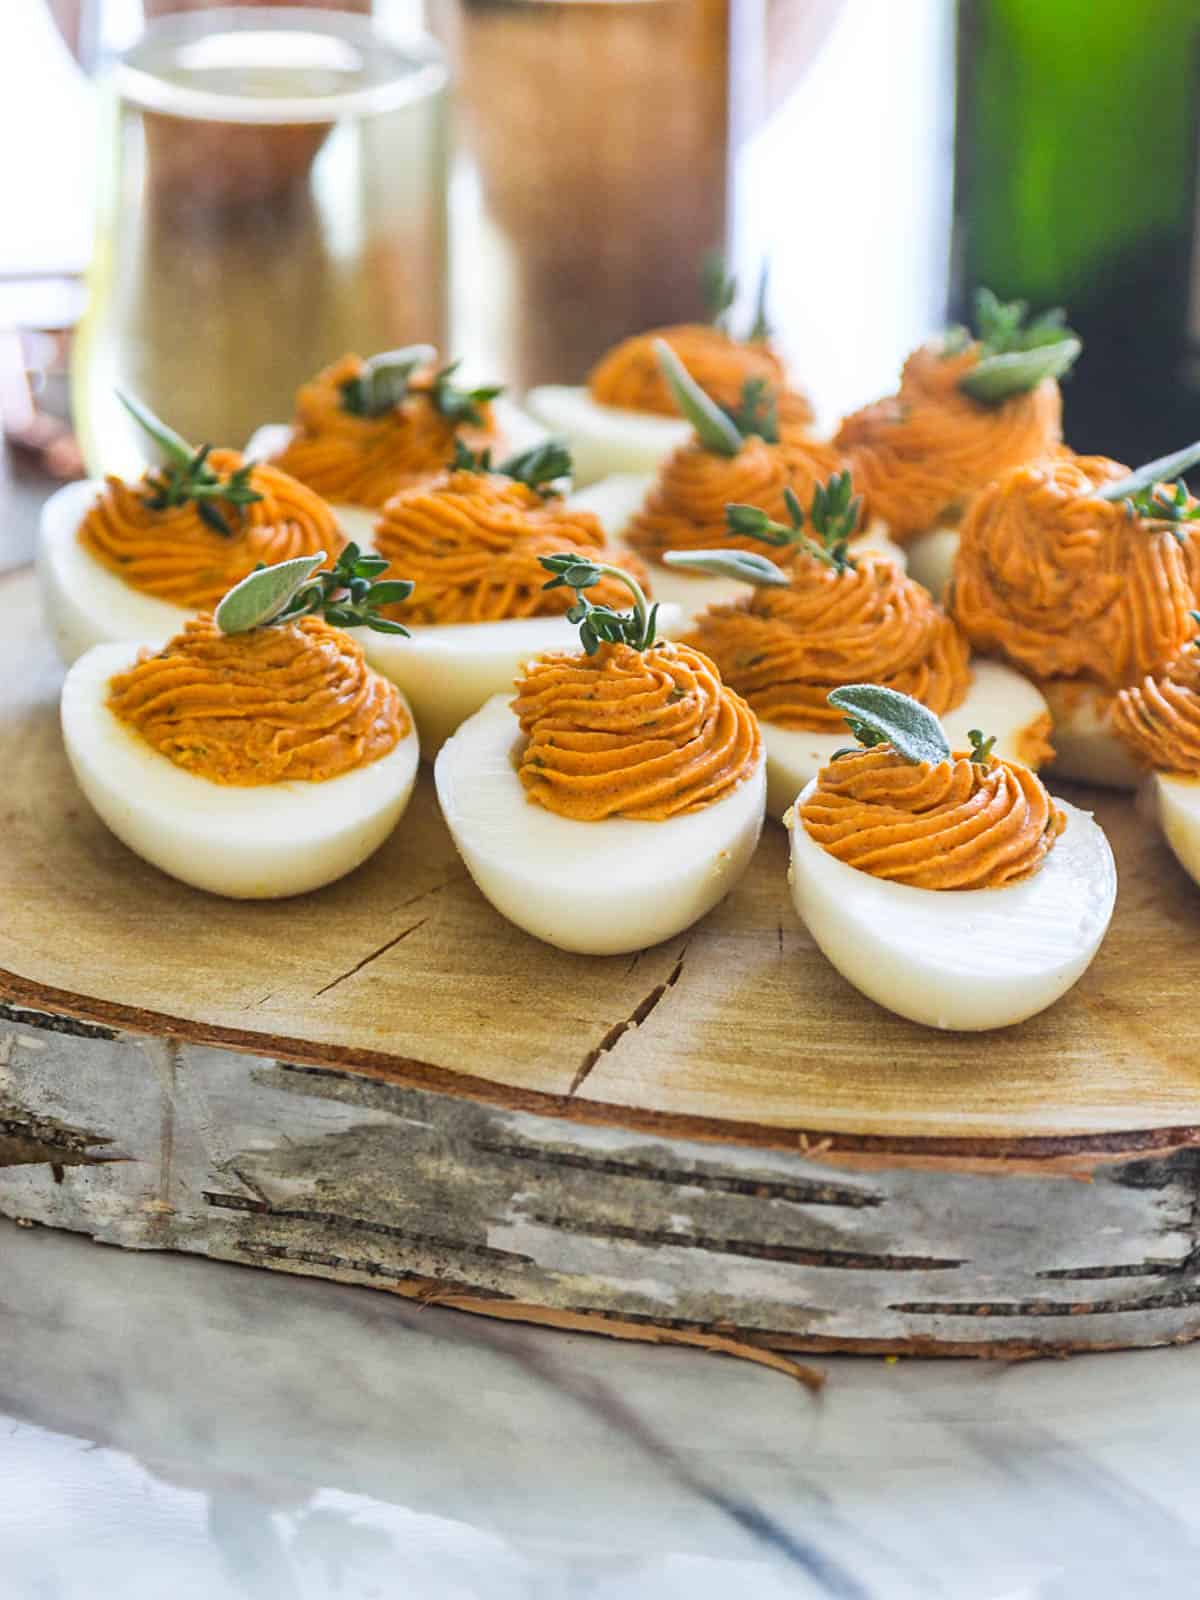 A rustic piece of tree cut into a platter with Thanksgiving deviled eggs filled with rust colored filling and garnished with herbs.